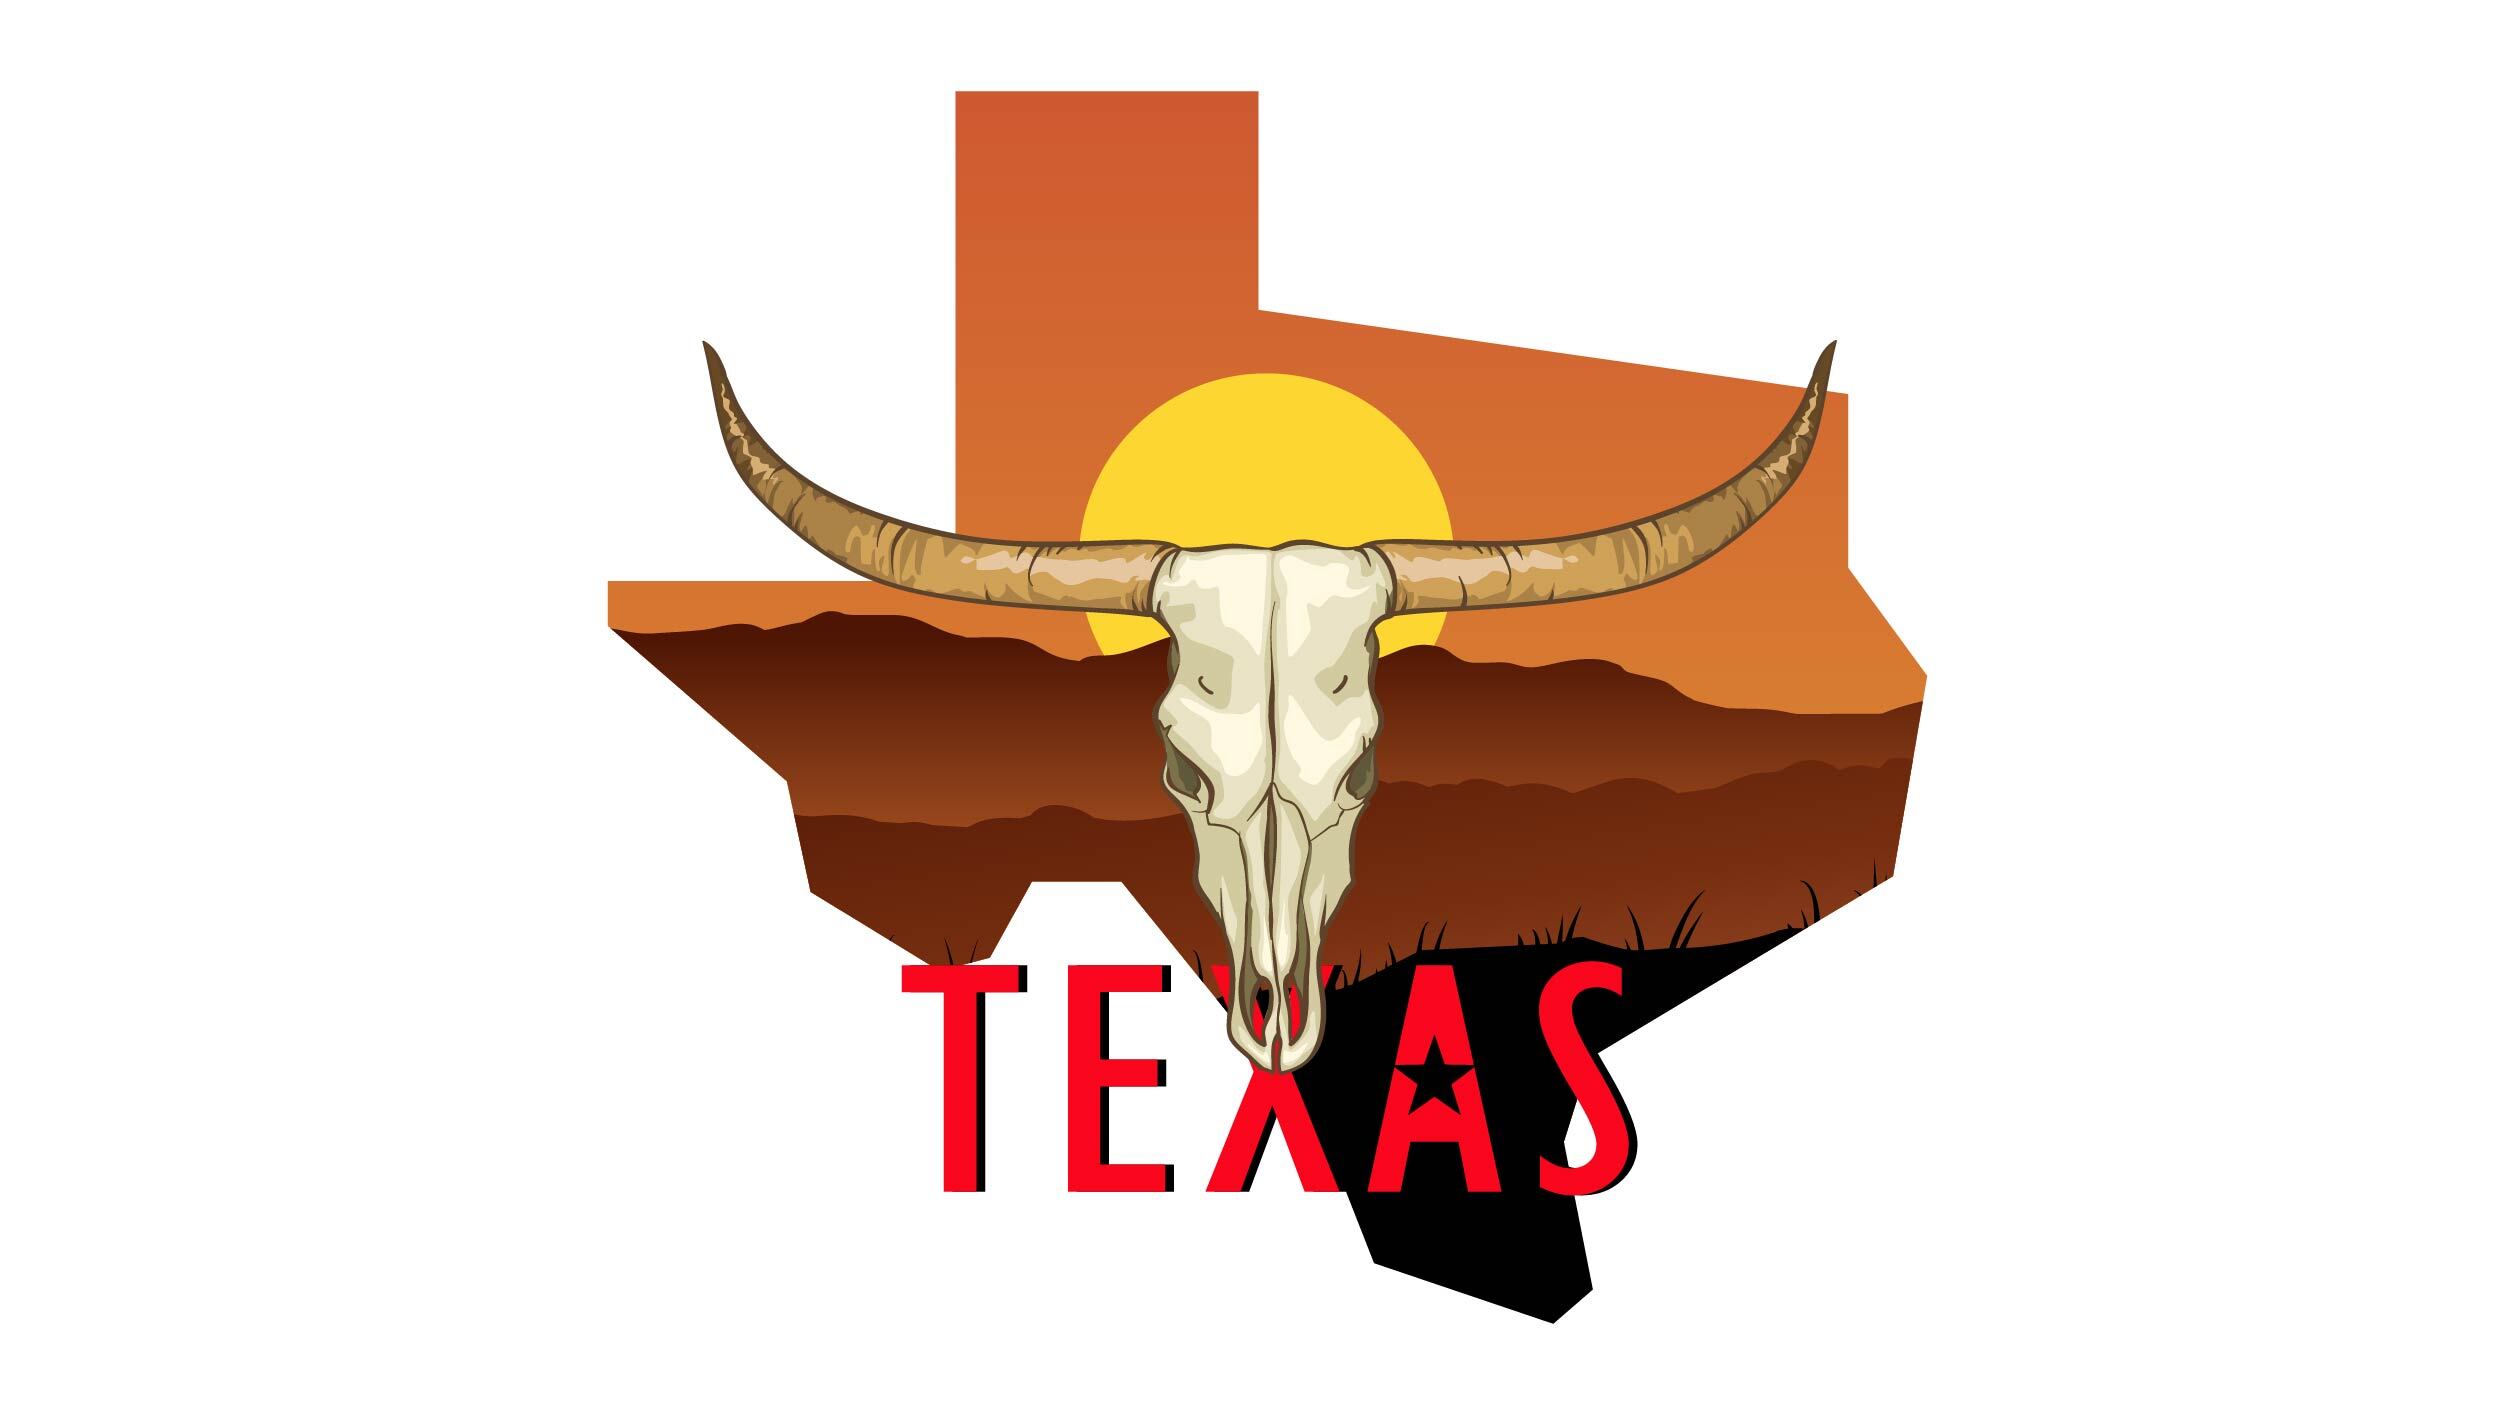 Illustration of a buffalo and Texas state in text